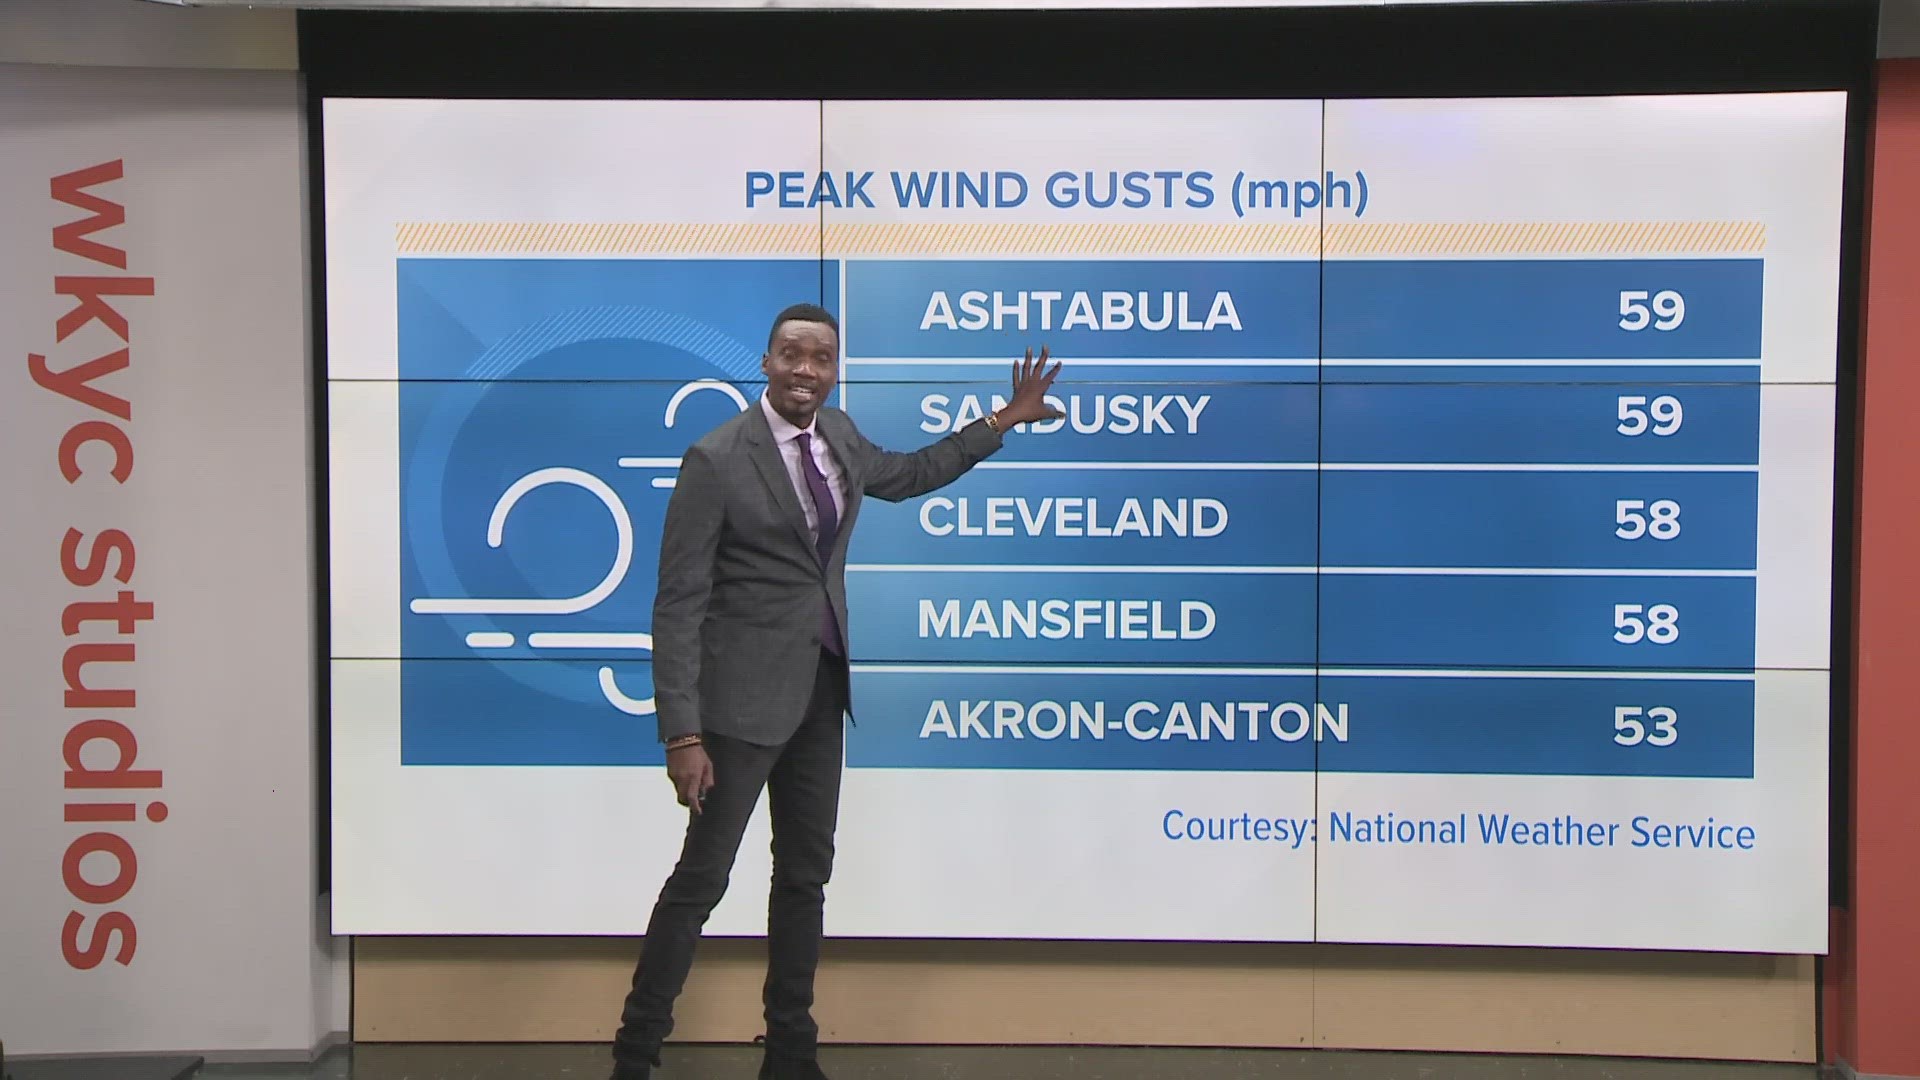 We're tracking power outages throughout the region due to strong winds on Saturday.